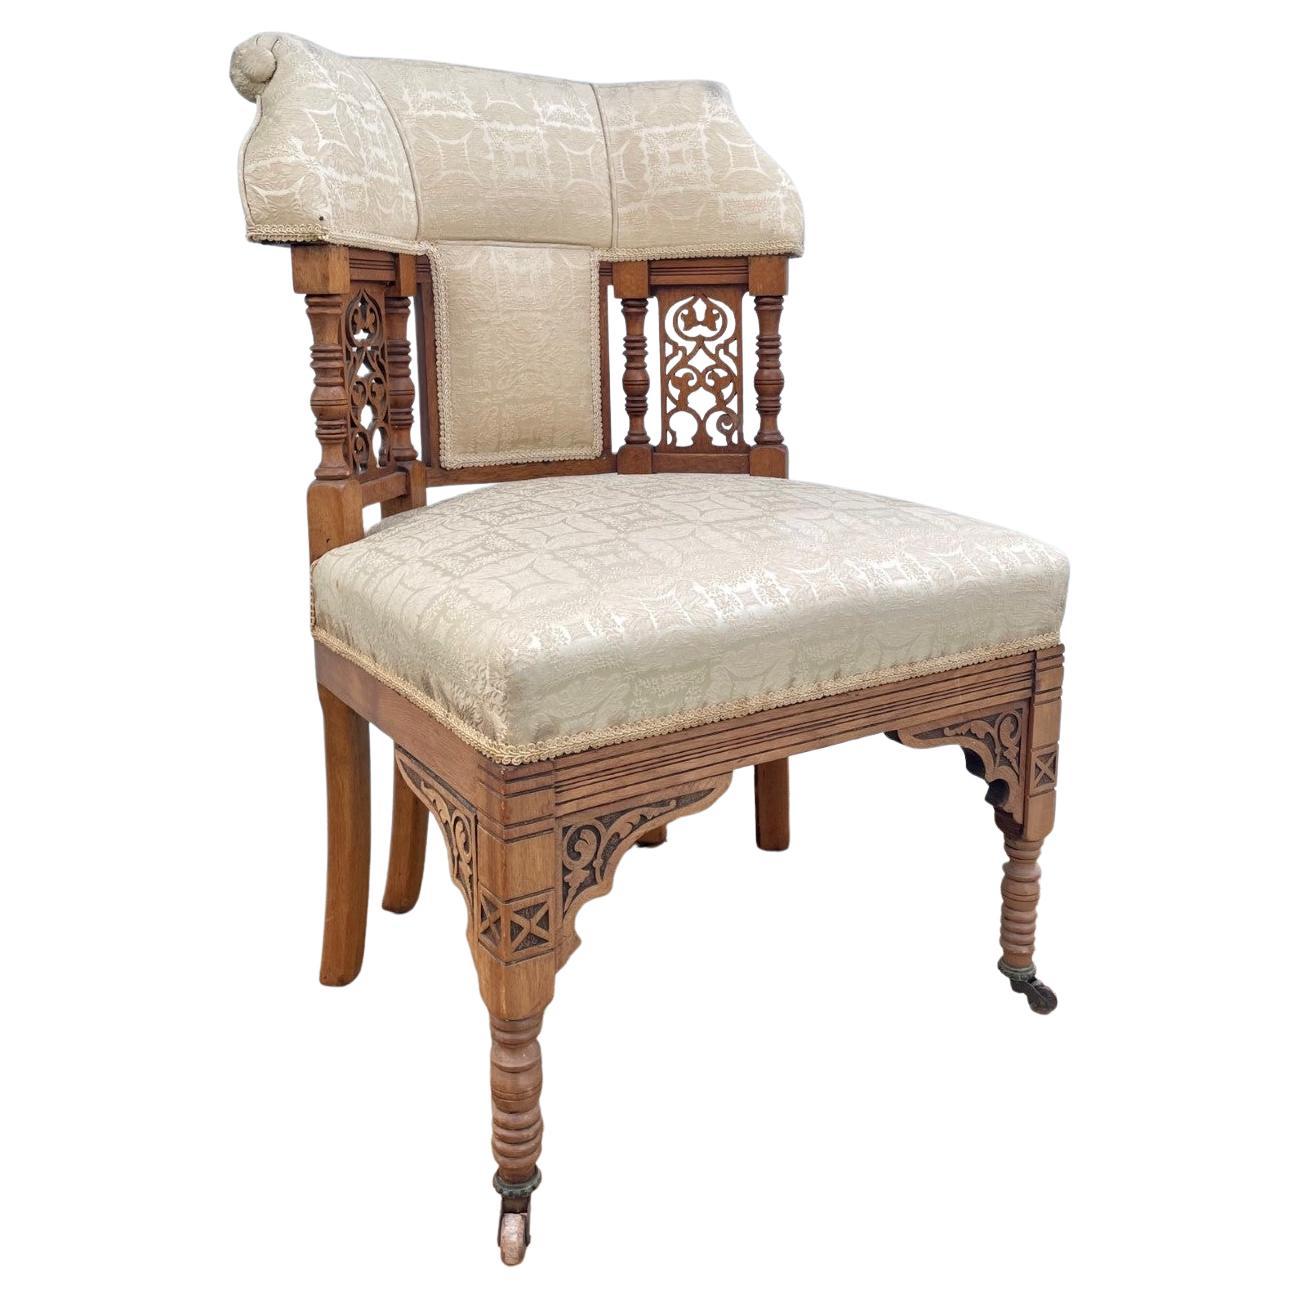 American Victorian Eastlake Upholstered chair 19th century.

Impressive carved and upholstered parlor chair, carved in openwork with two additional back legs set on brass casters. It was made in the midst of the Victorian Aesthetic Movement. The